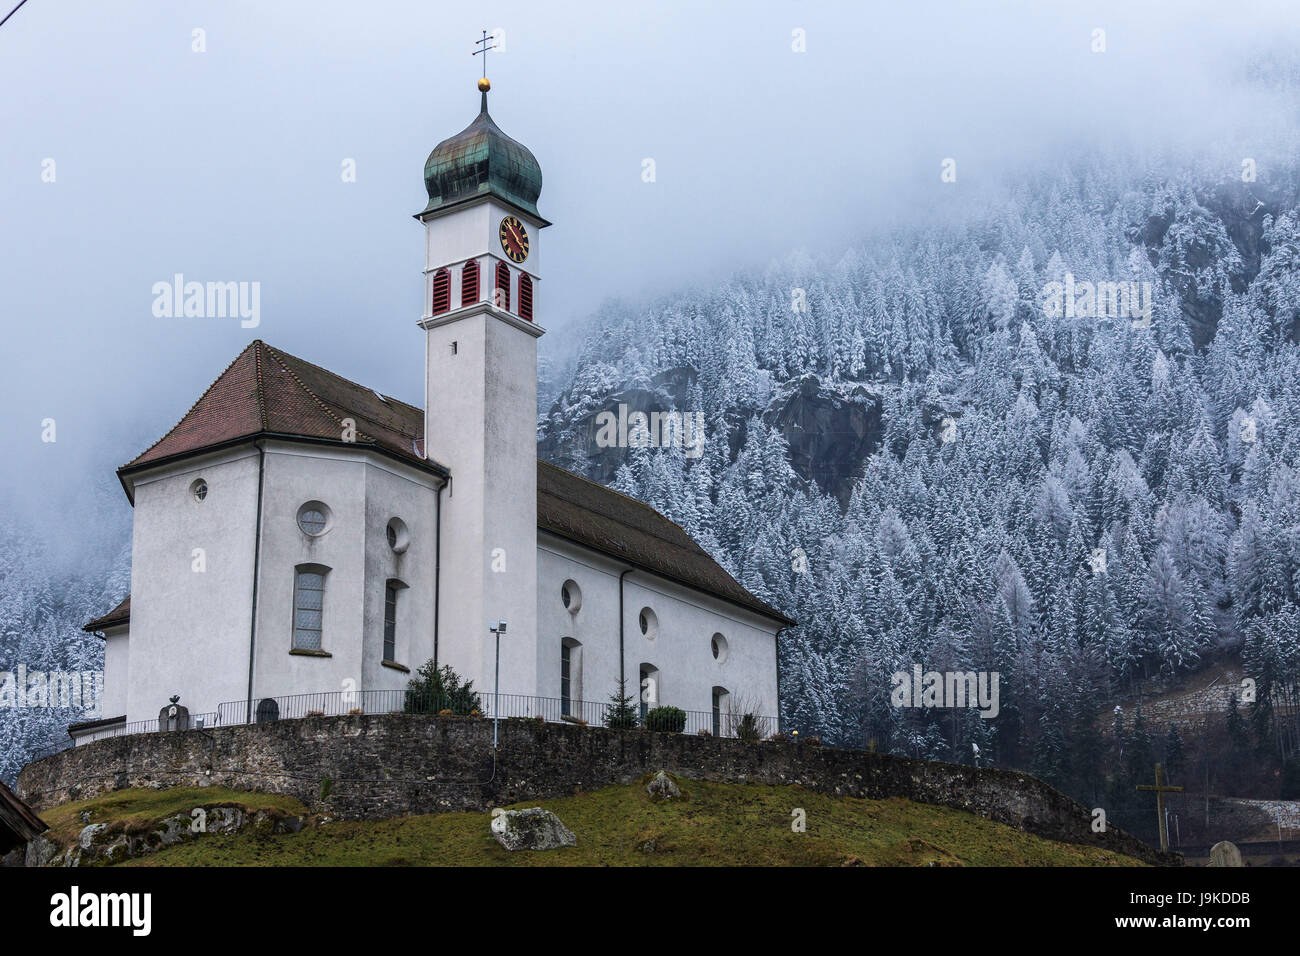 Clouds and mist on the alpine church of Wassen surrounded by snowy woods Canton of Uri Switzerland Europe Stock Photo